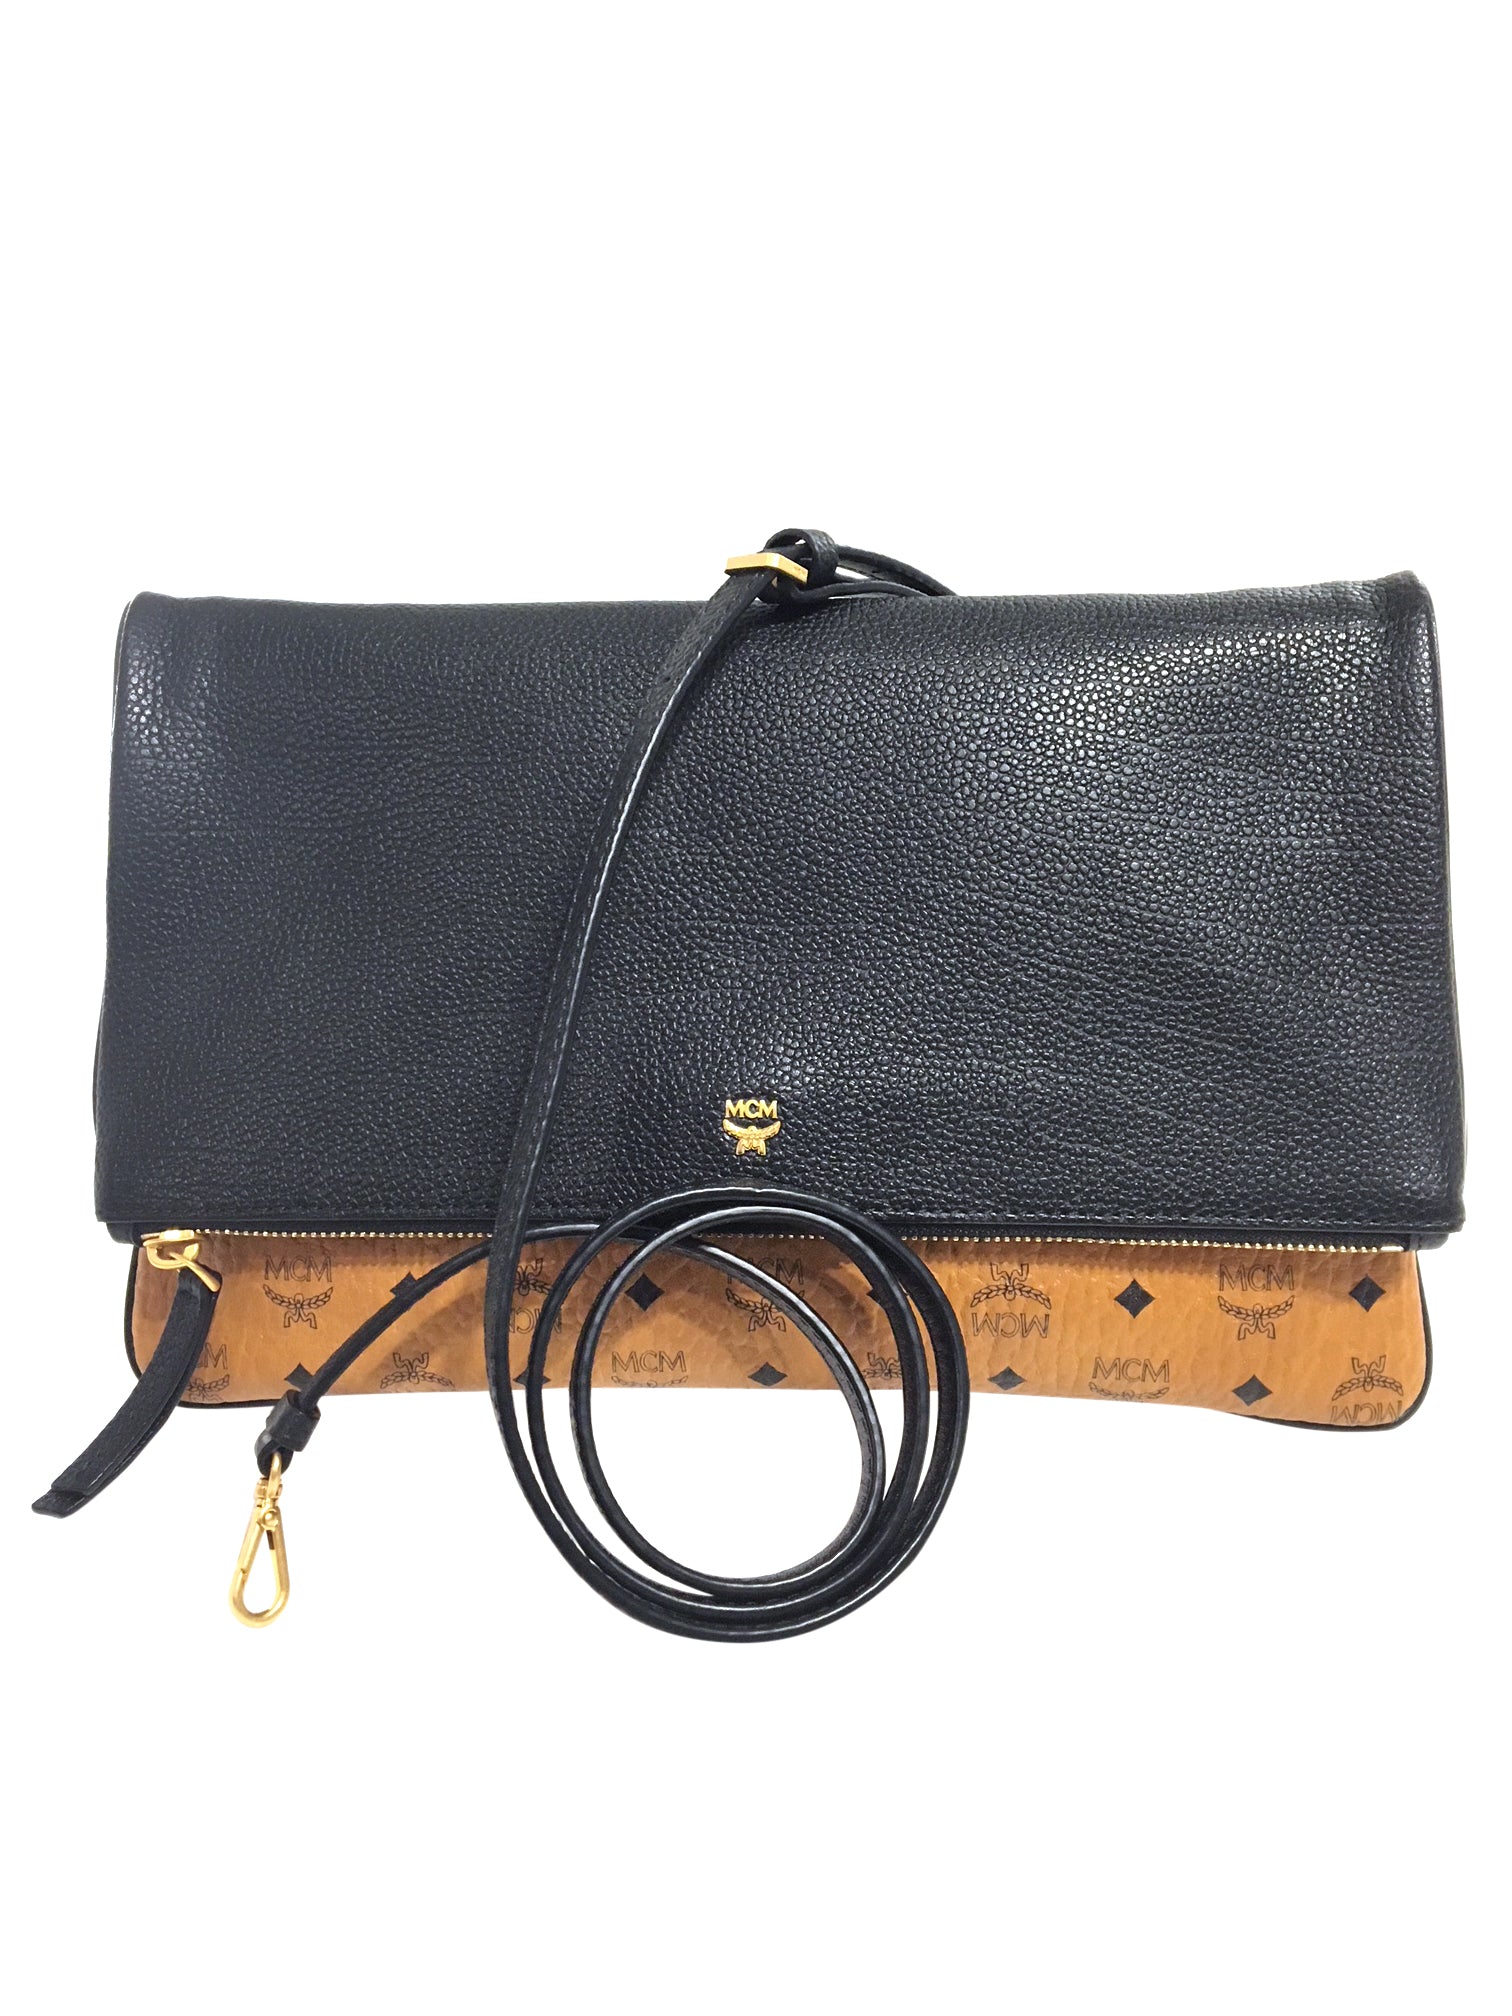 MCM Clutch - aptiques by Authentic PreOwned